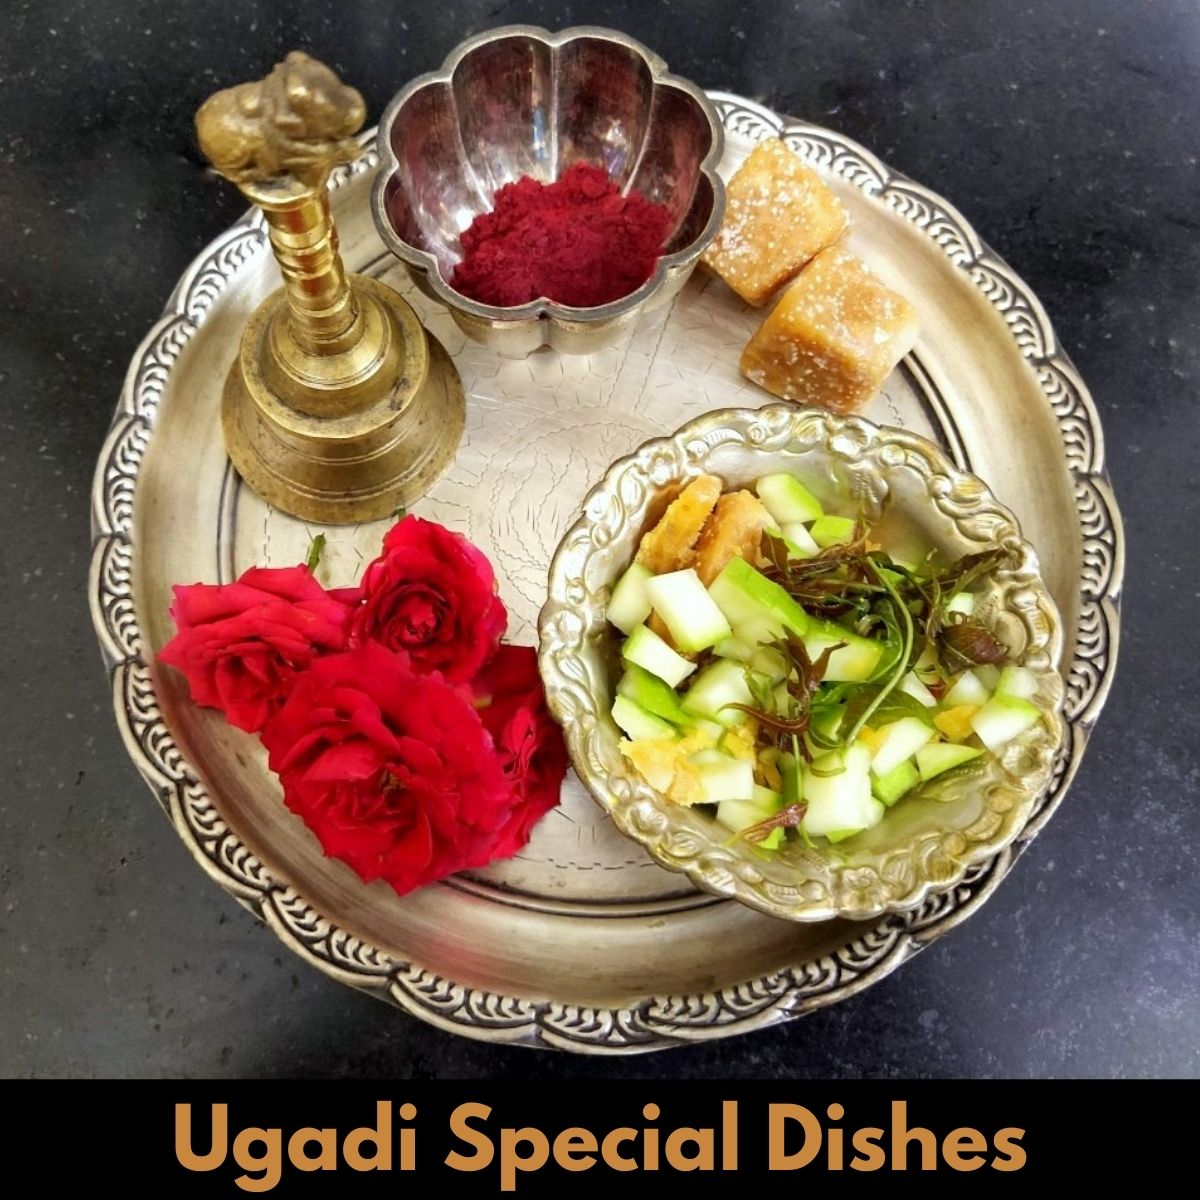 Ugadi Special Dishes